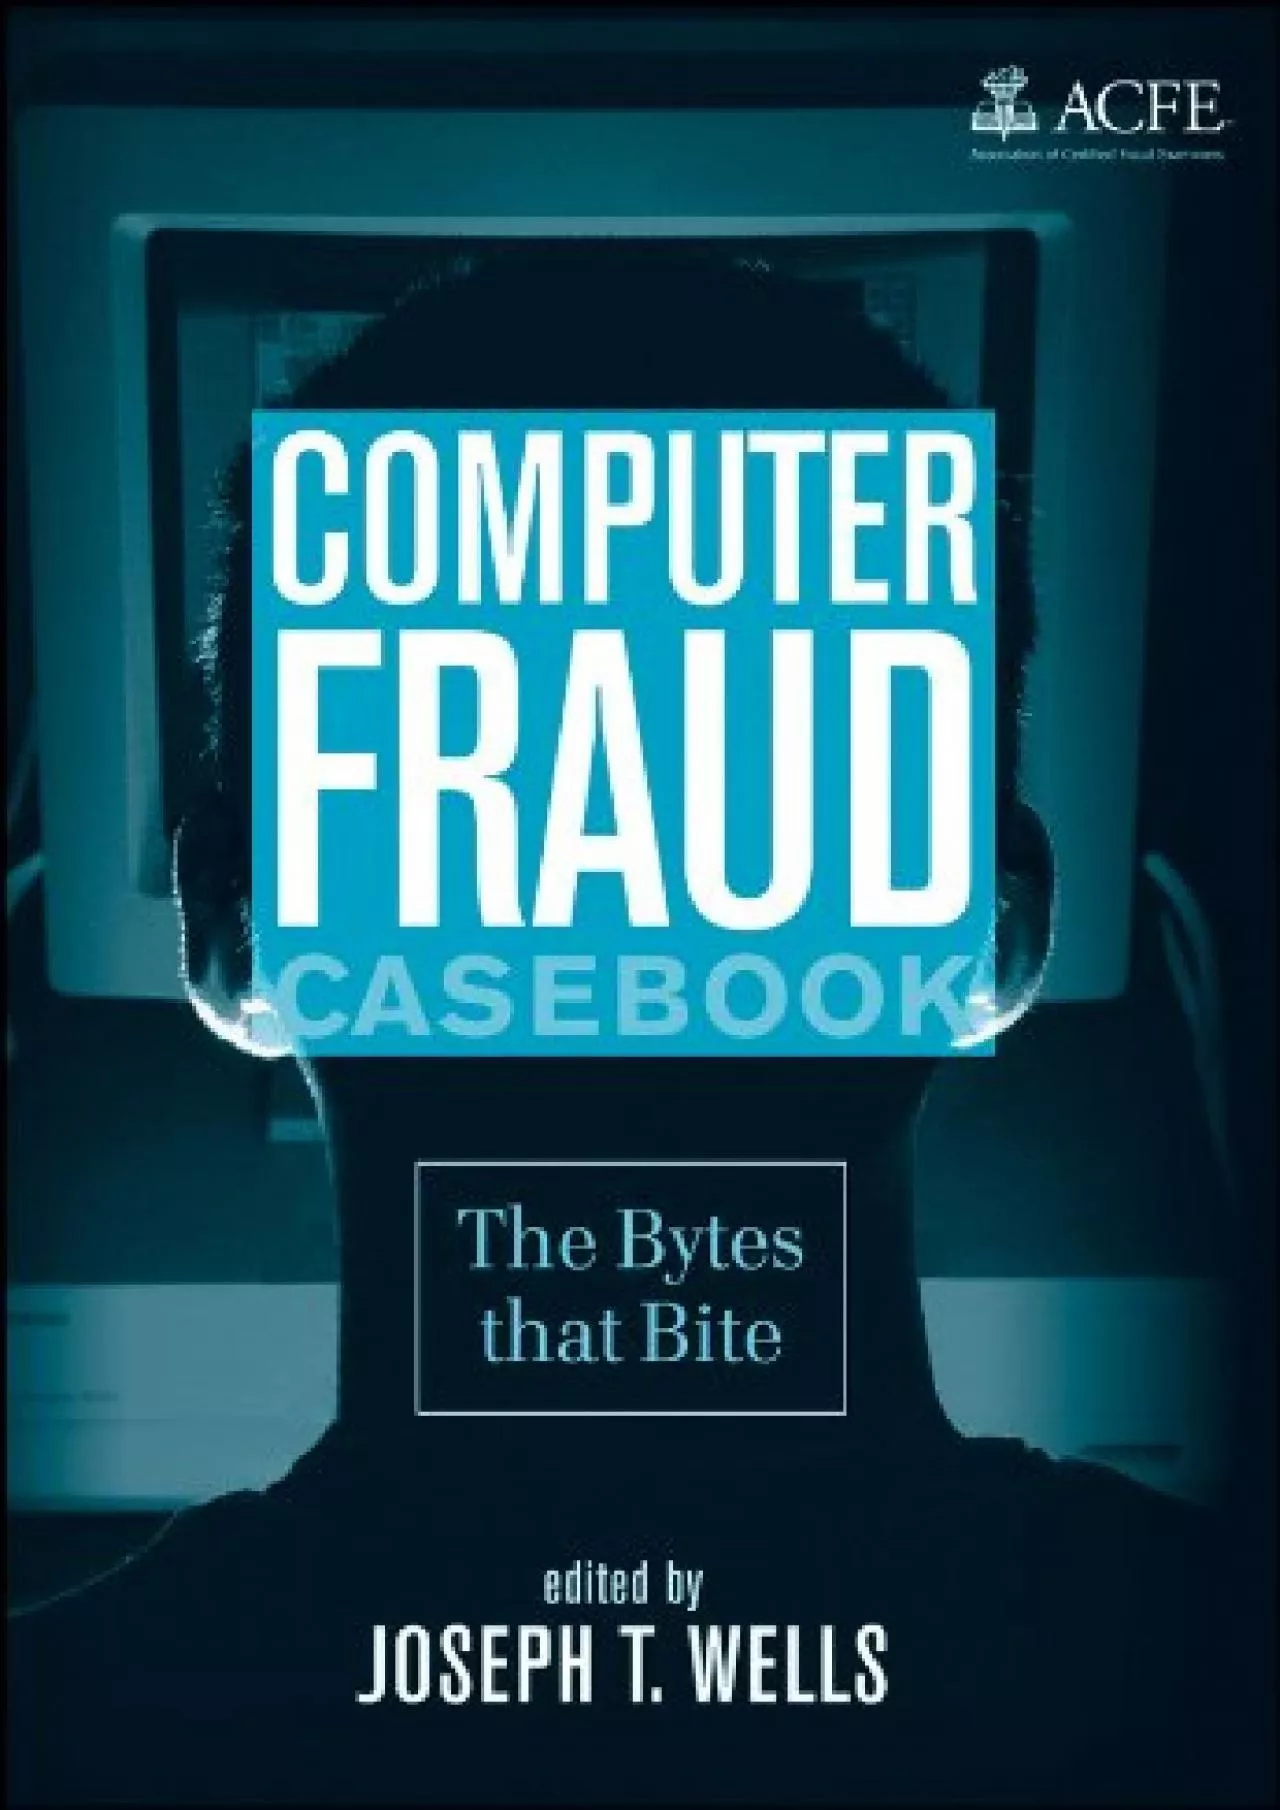 (BOOK)-Computer Fraud Casebook: The Bytes that Bite